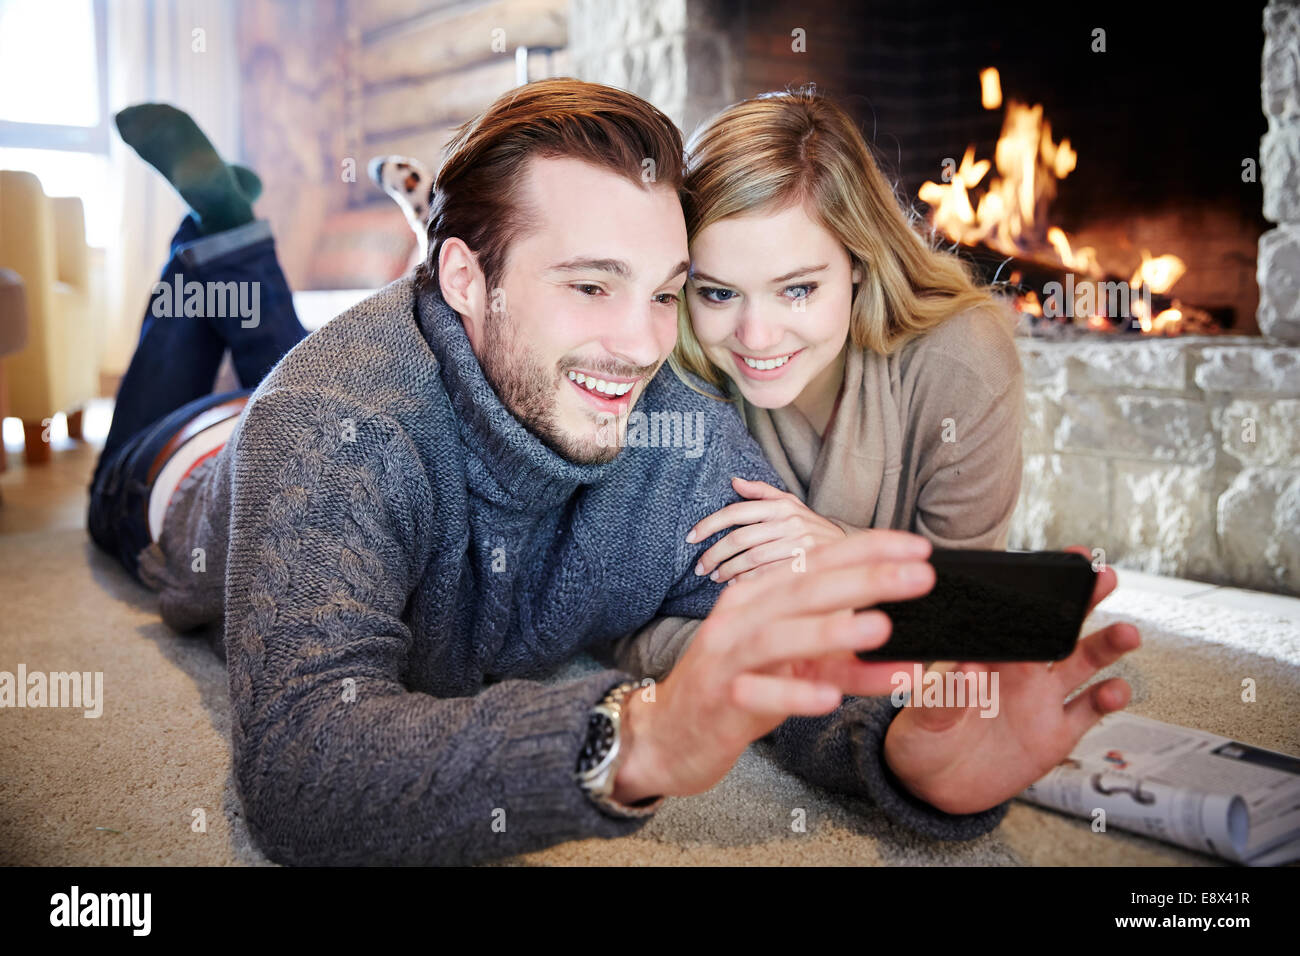 Couple looking at cell phone together Stock Photo